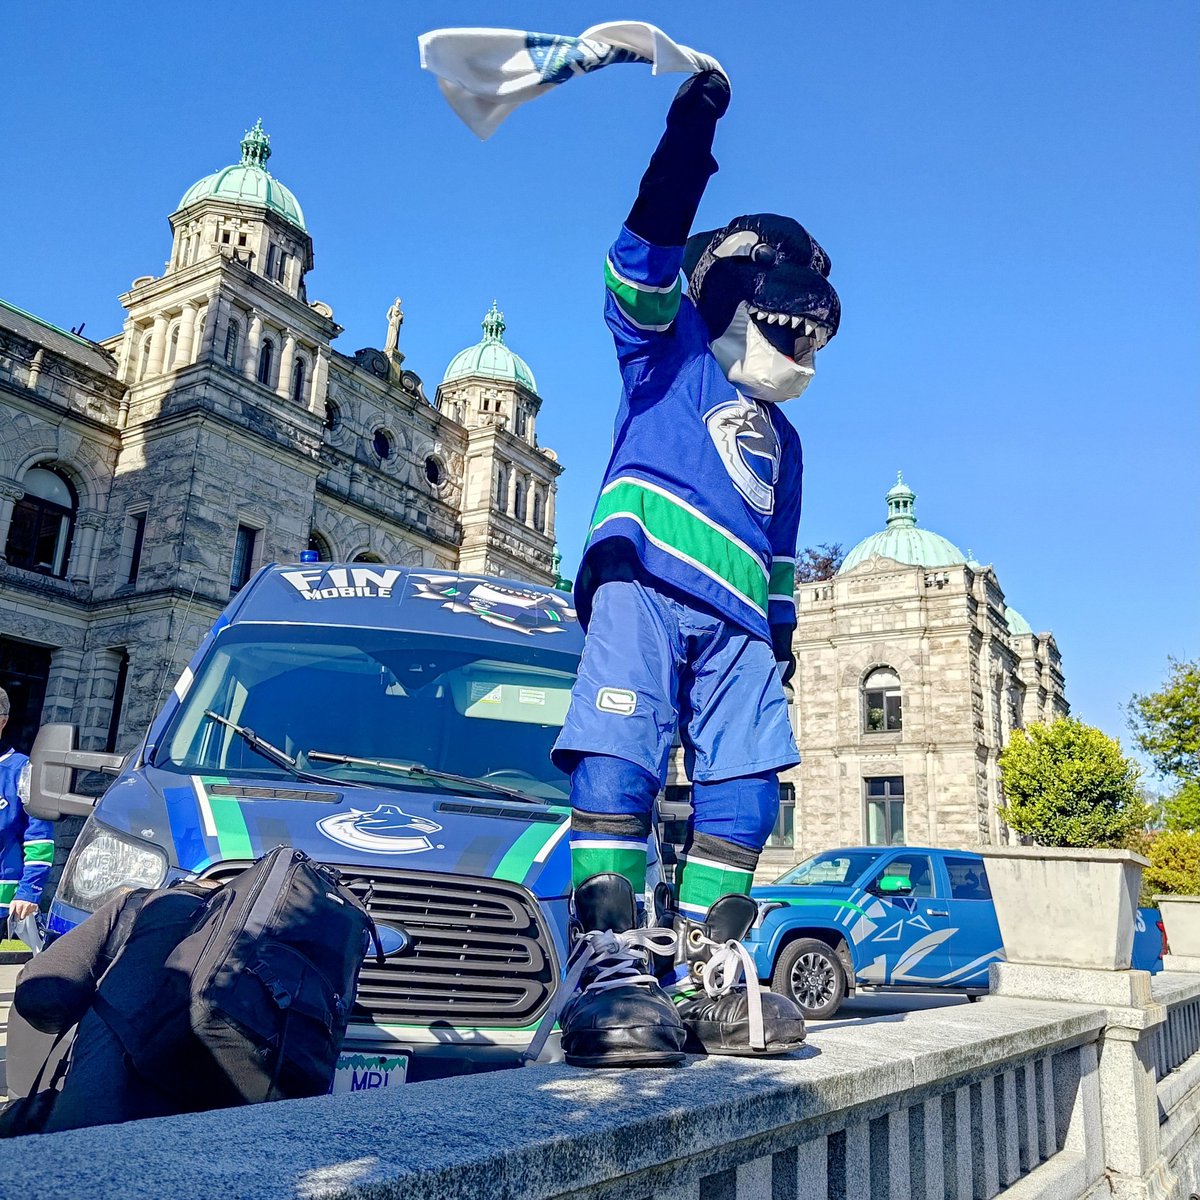 Some mornings at work are more exciting than others...

Thanks for swimming over to the @BCLegislature in Victoria, Fin! Go @Canucks go! 🏒 #bcpoli #gocanucksgo